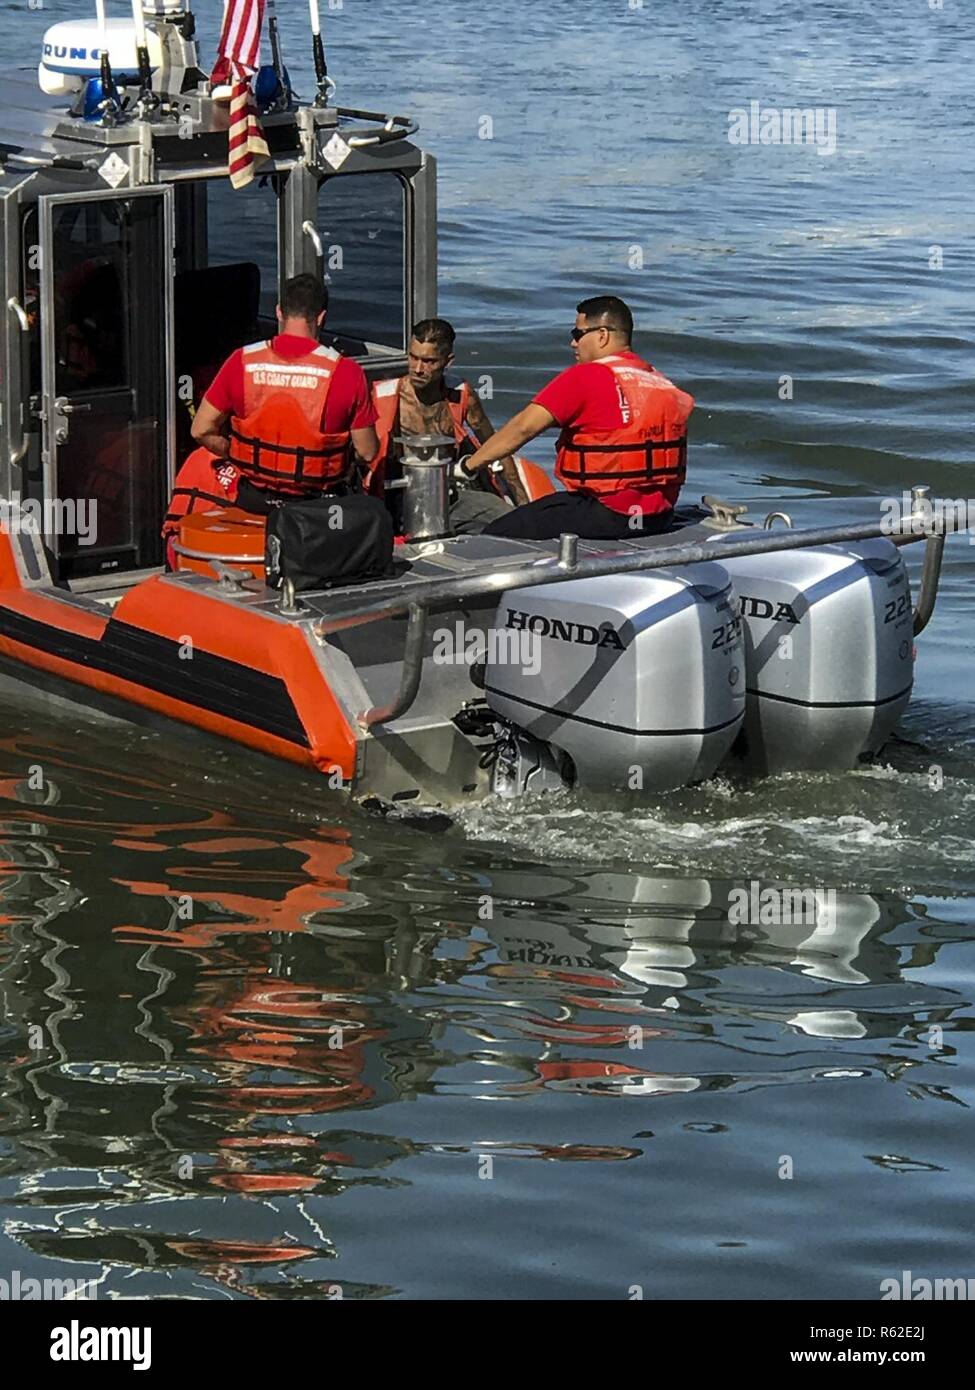 A Coast Guard 29-foot Special Purpose Craft-Shallow Water boat crew from Station Fort Myers Beach and Lee County EMS personnel are shown Tuesday, May 9, 2017 with a 28-year-old man (center) in need of medical attention aboard the SPC-SW near Estero Bay, Florida. The man was medevacked from the sailboat Anna Maria due to suffering from abdominal pain and transferred to EMS on shore in stable condition. Stock Photo